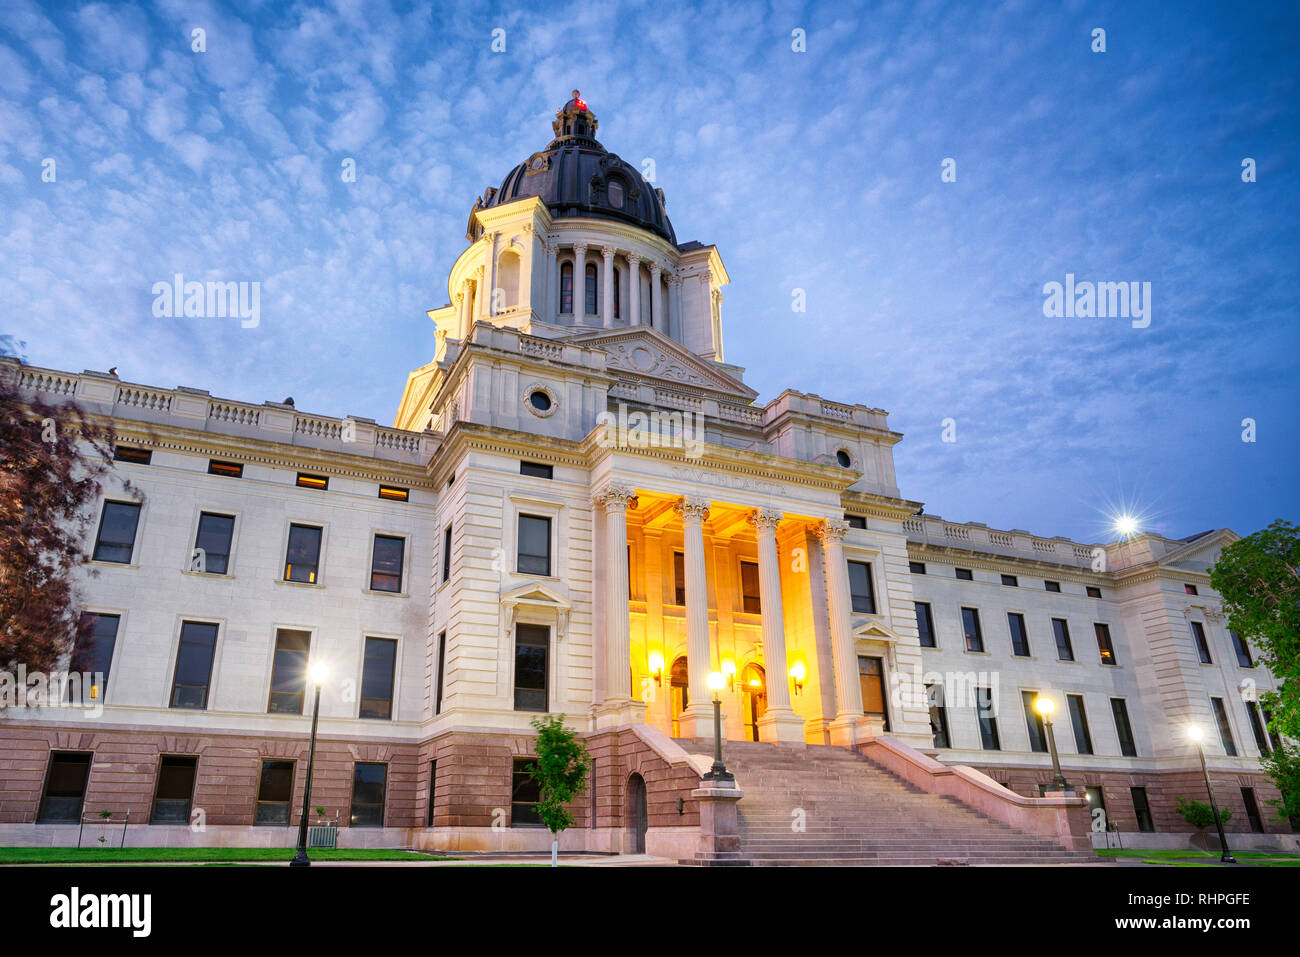 Facade of South Dakota Capital Building in Pierre, SD at night Stock Photo